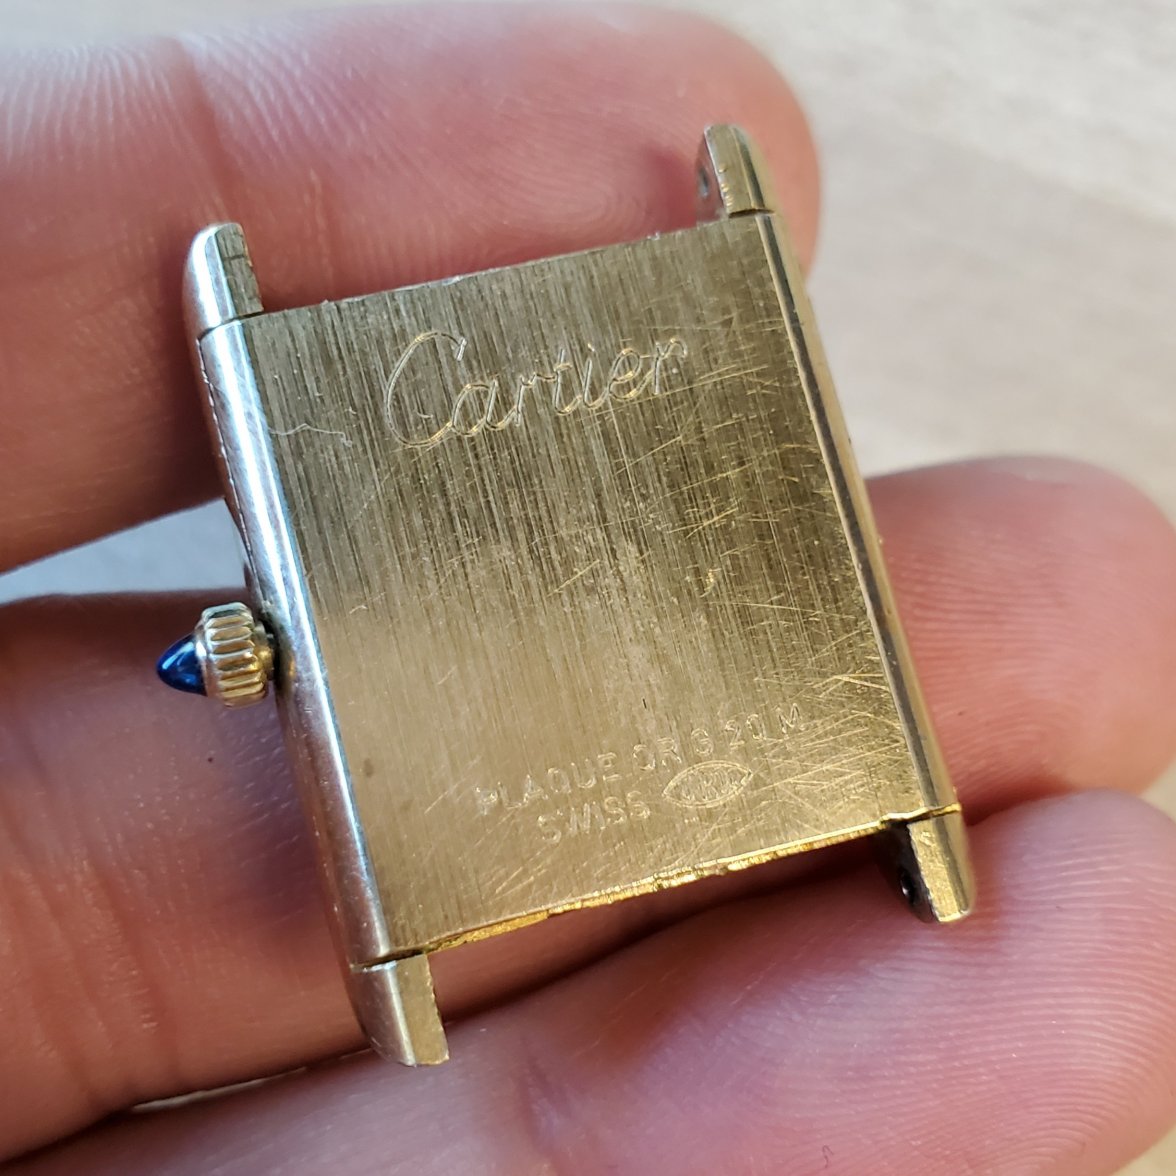 cartier serial numbers guide